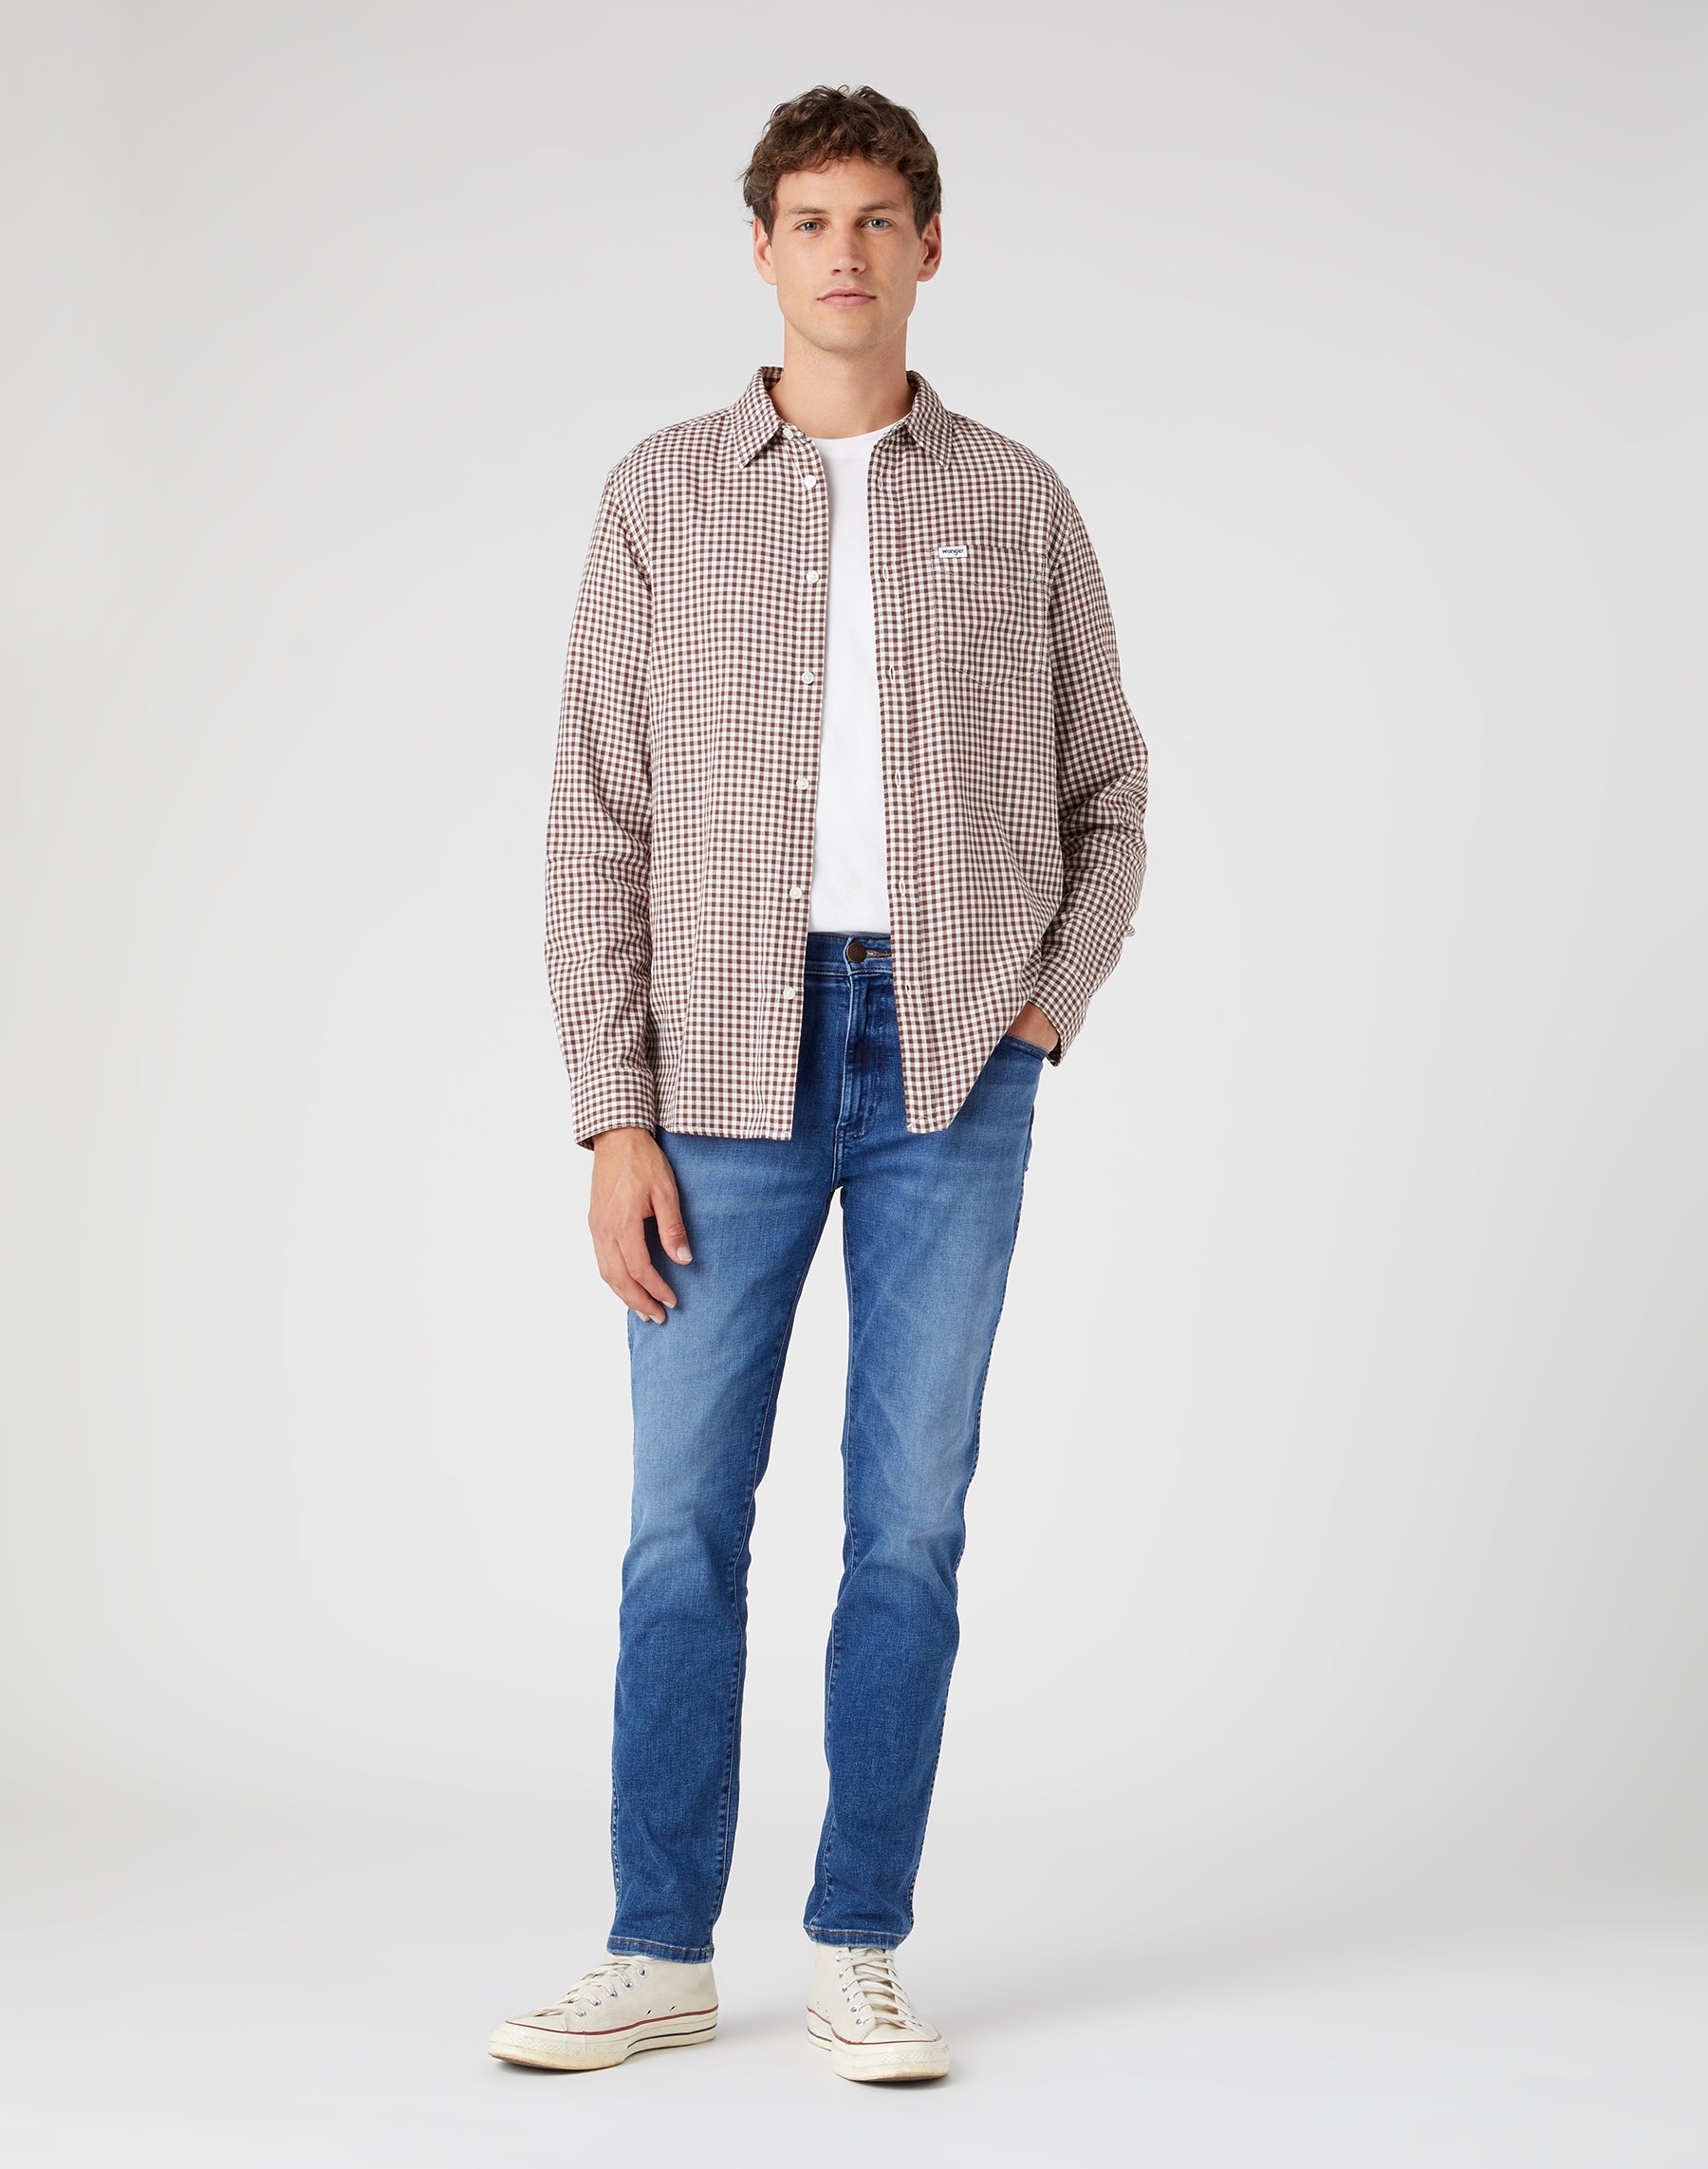 Larston High Stretch in Rough Rided Jeans Wrangler   